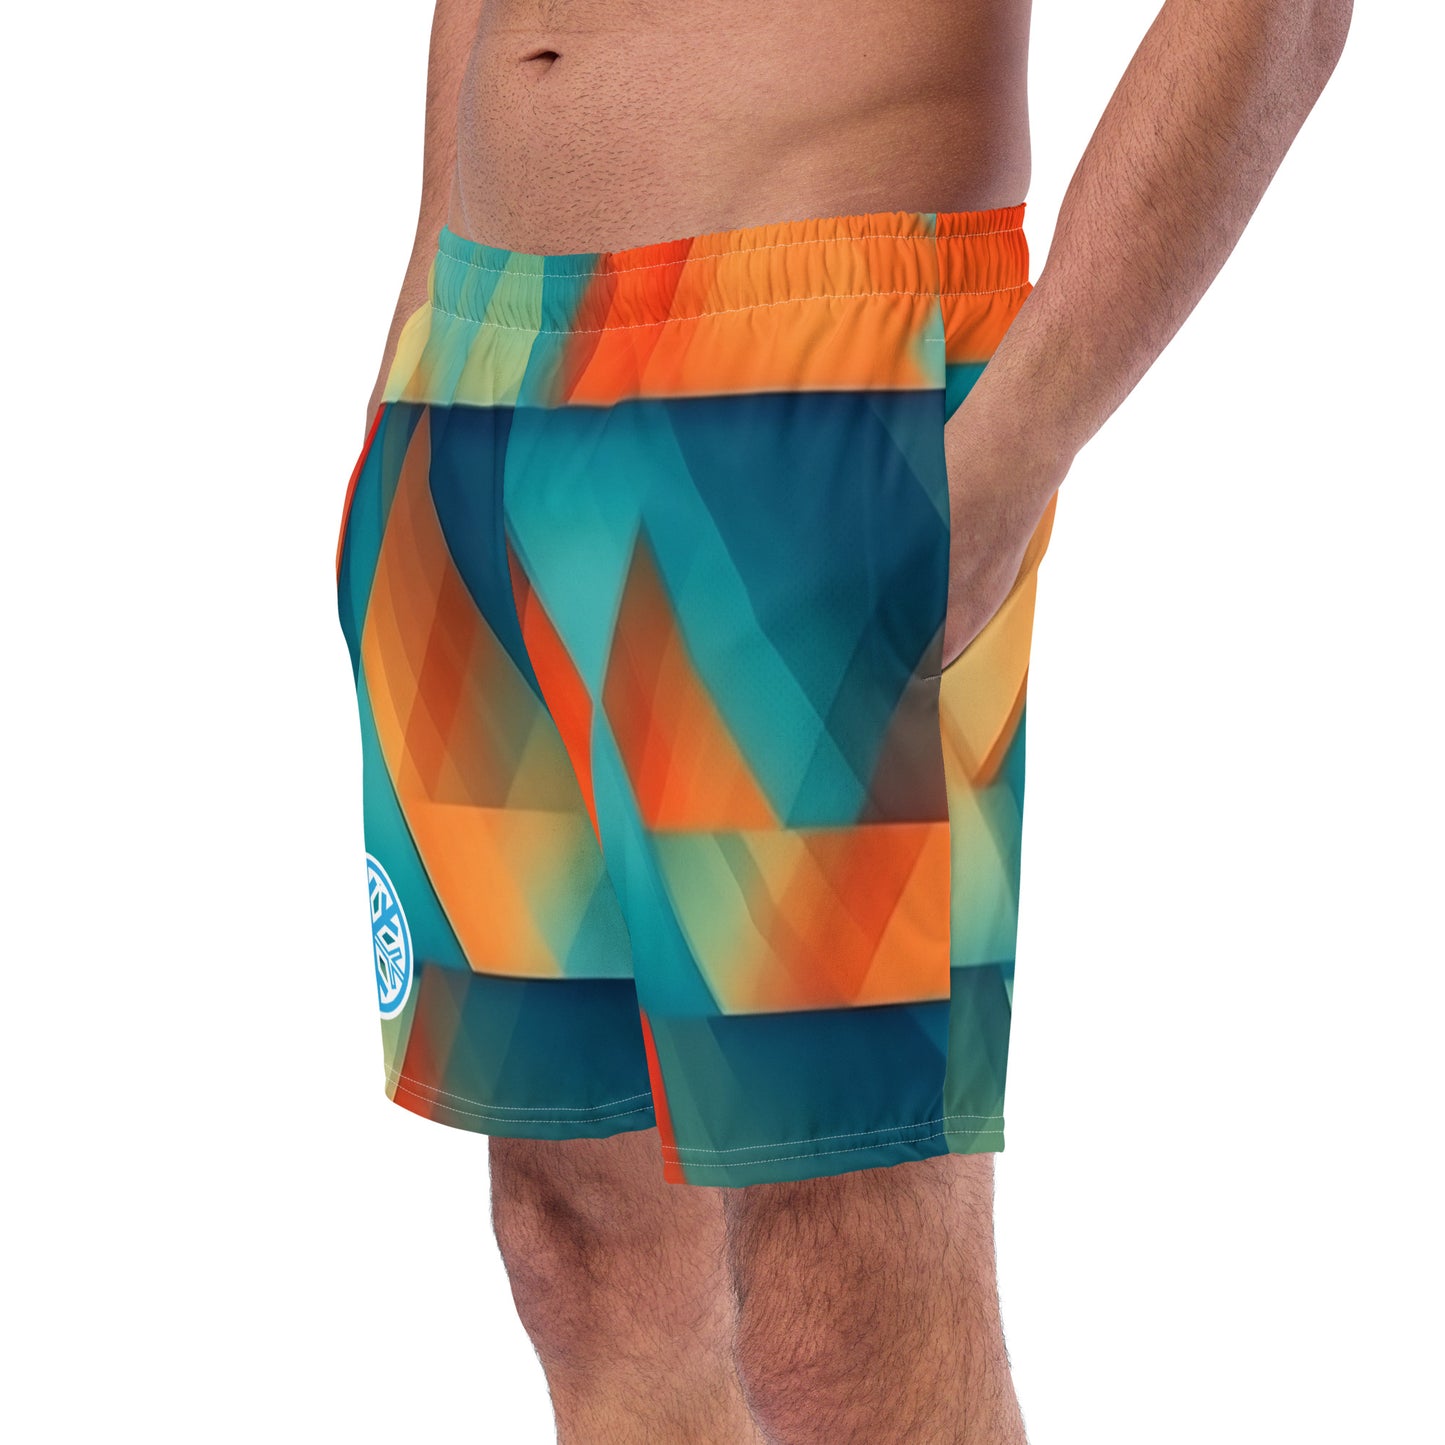 man side with prism swim shorts by B.Different Clothing independent streetwear inspired by street art graffiti